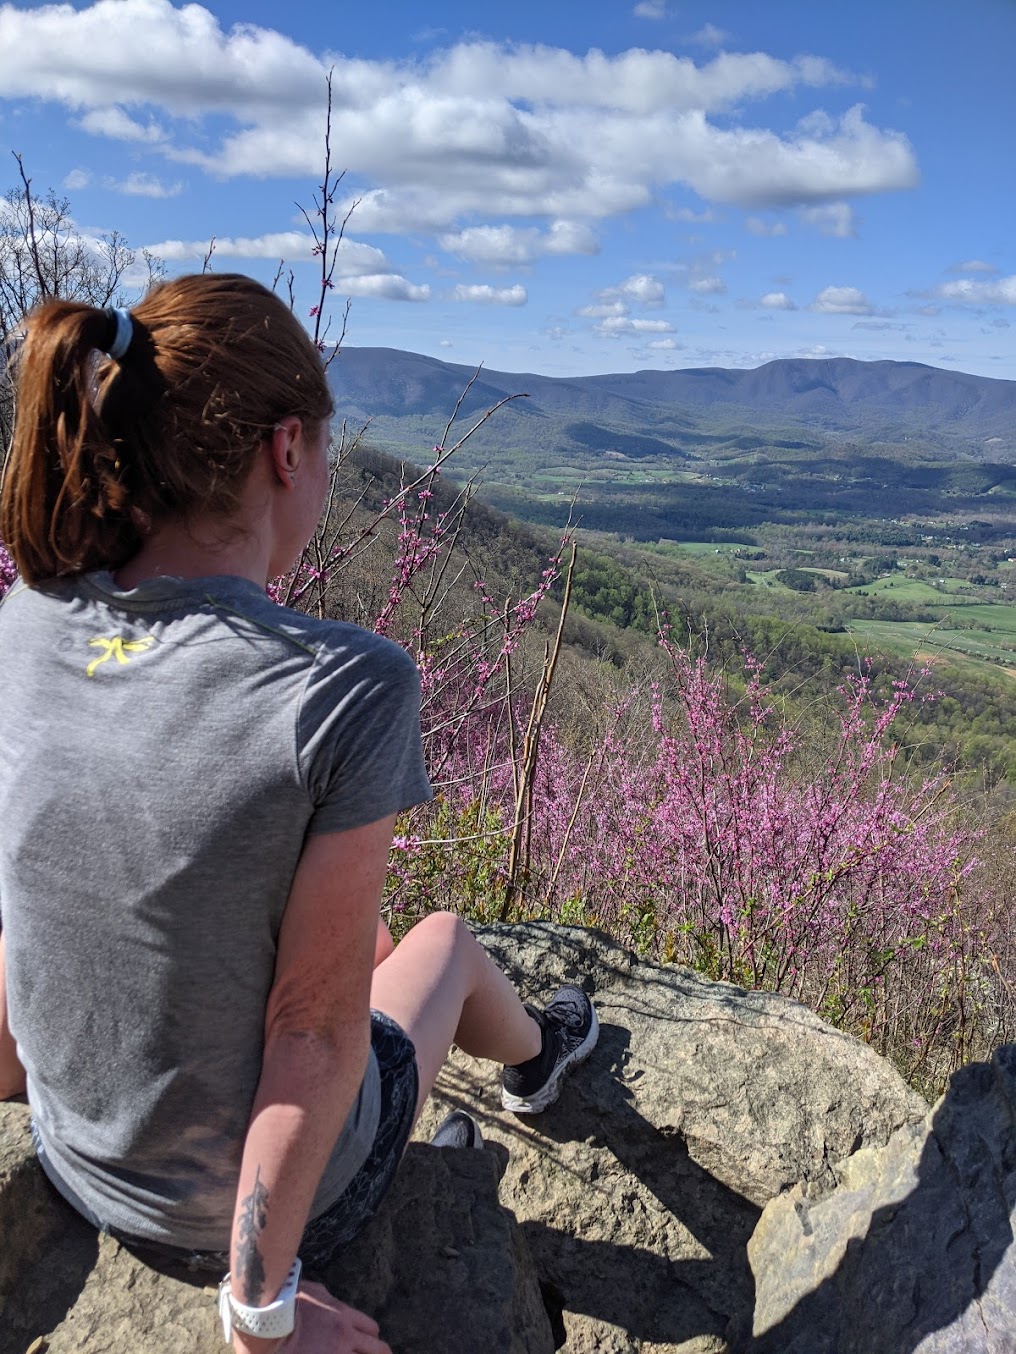 Lara paused to enjoy the view at Shenandoah National Park in early April)